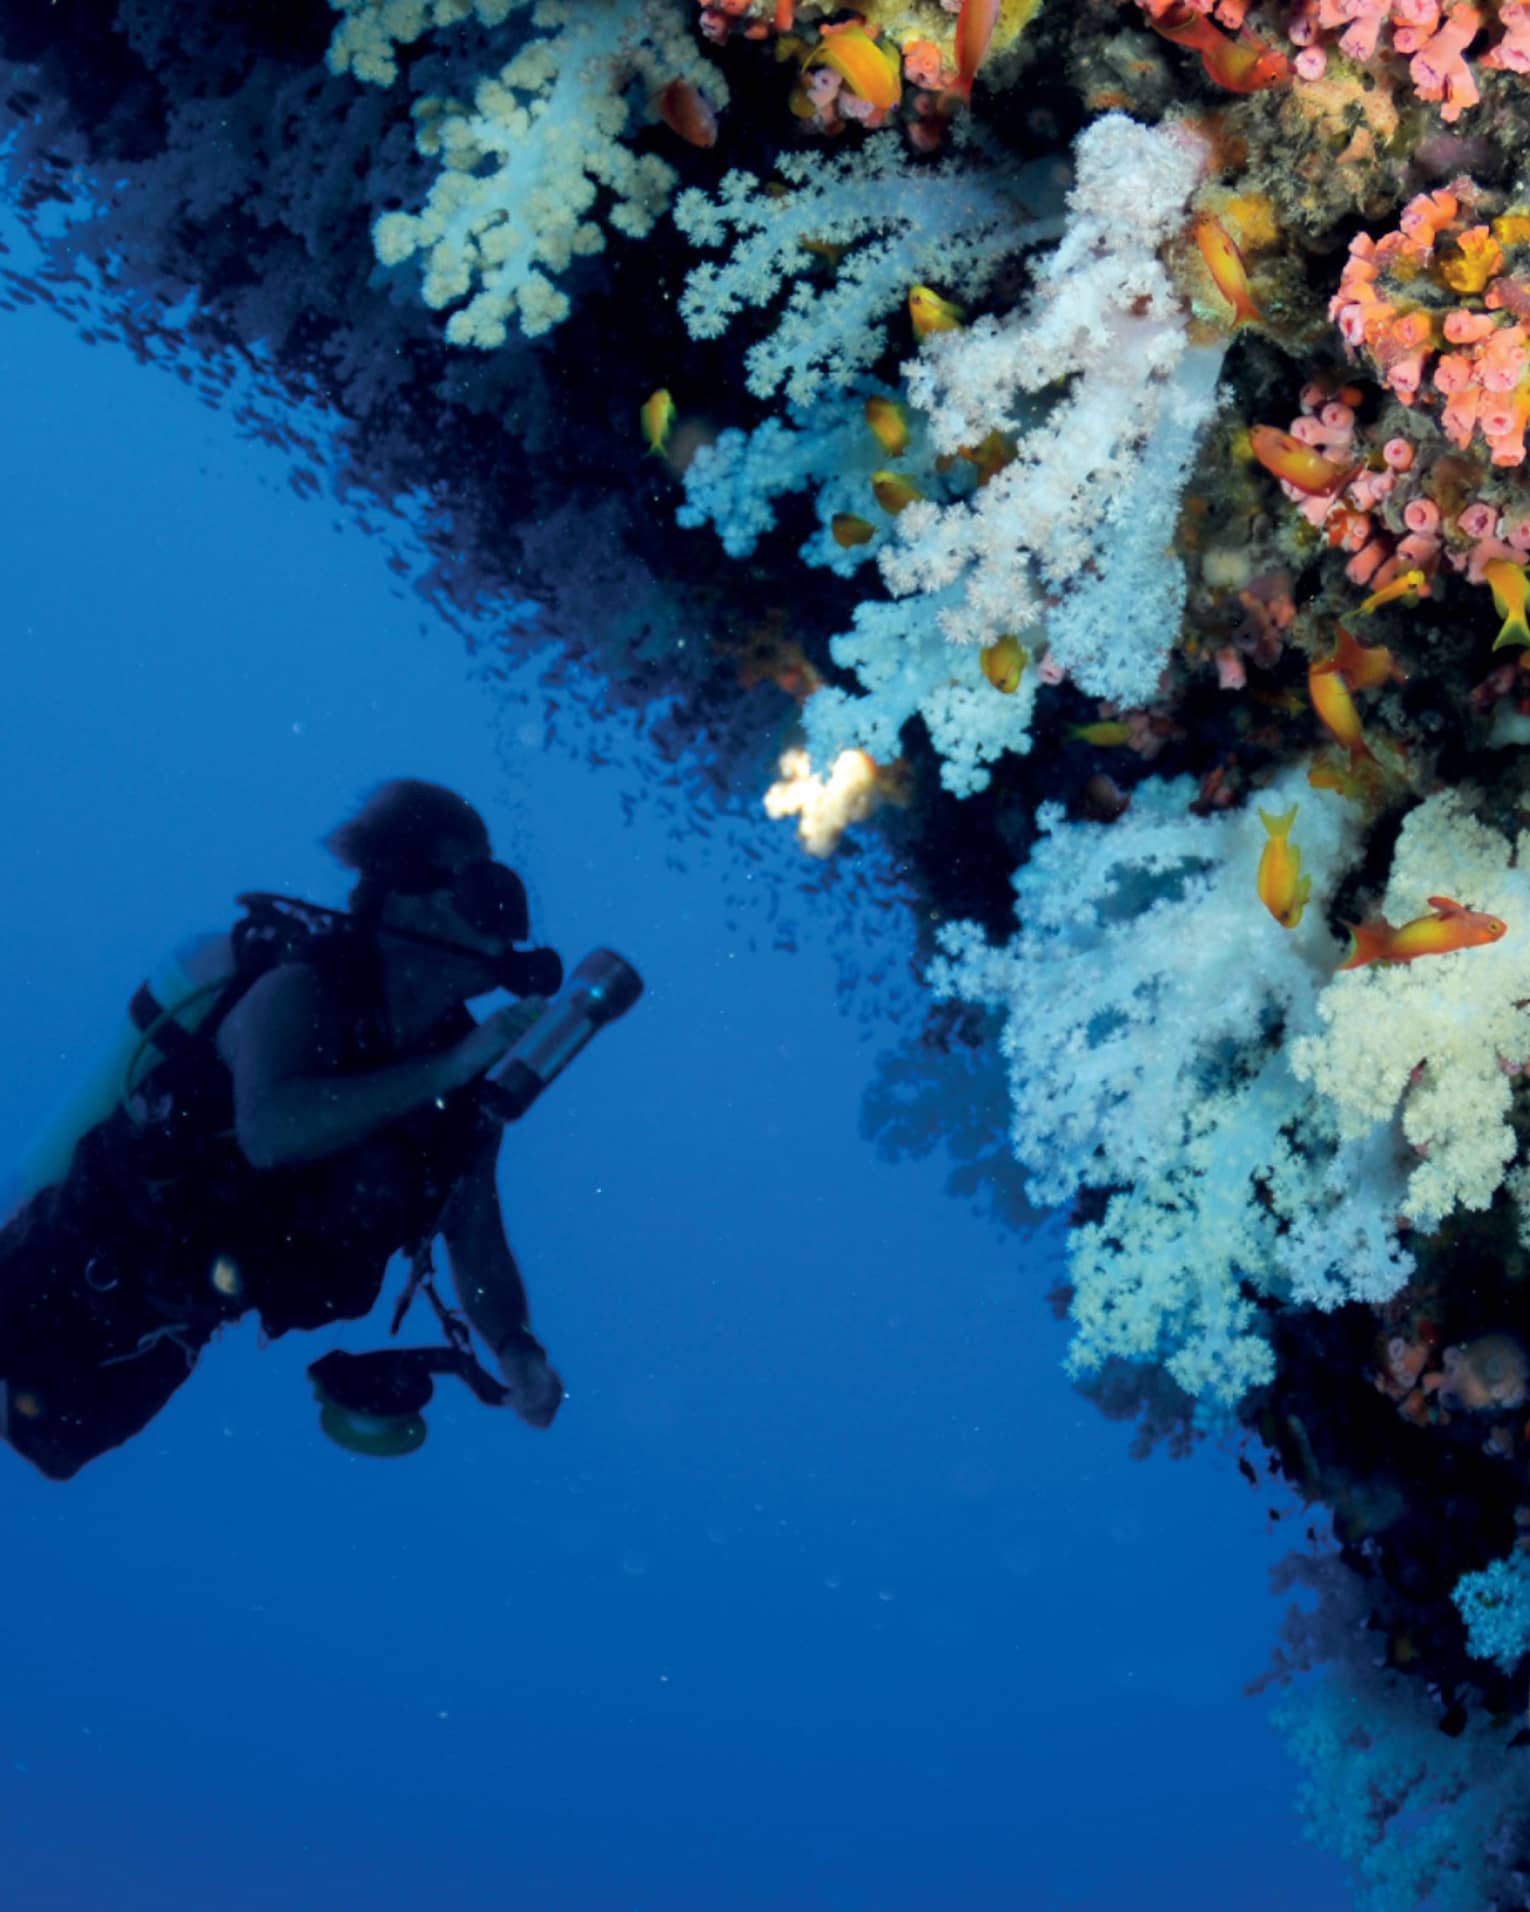 Scuba diver swims underwater next to colourful coral reef